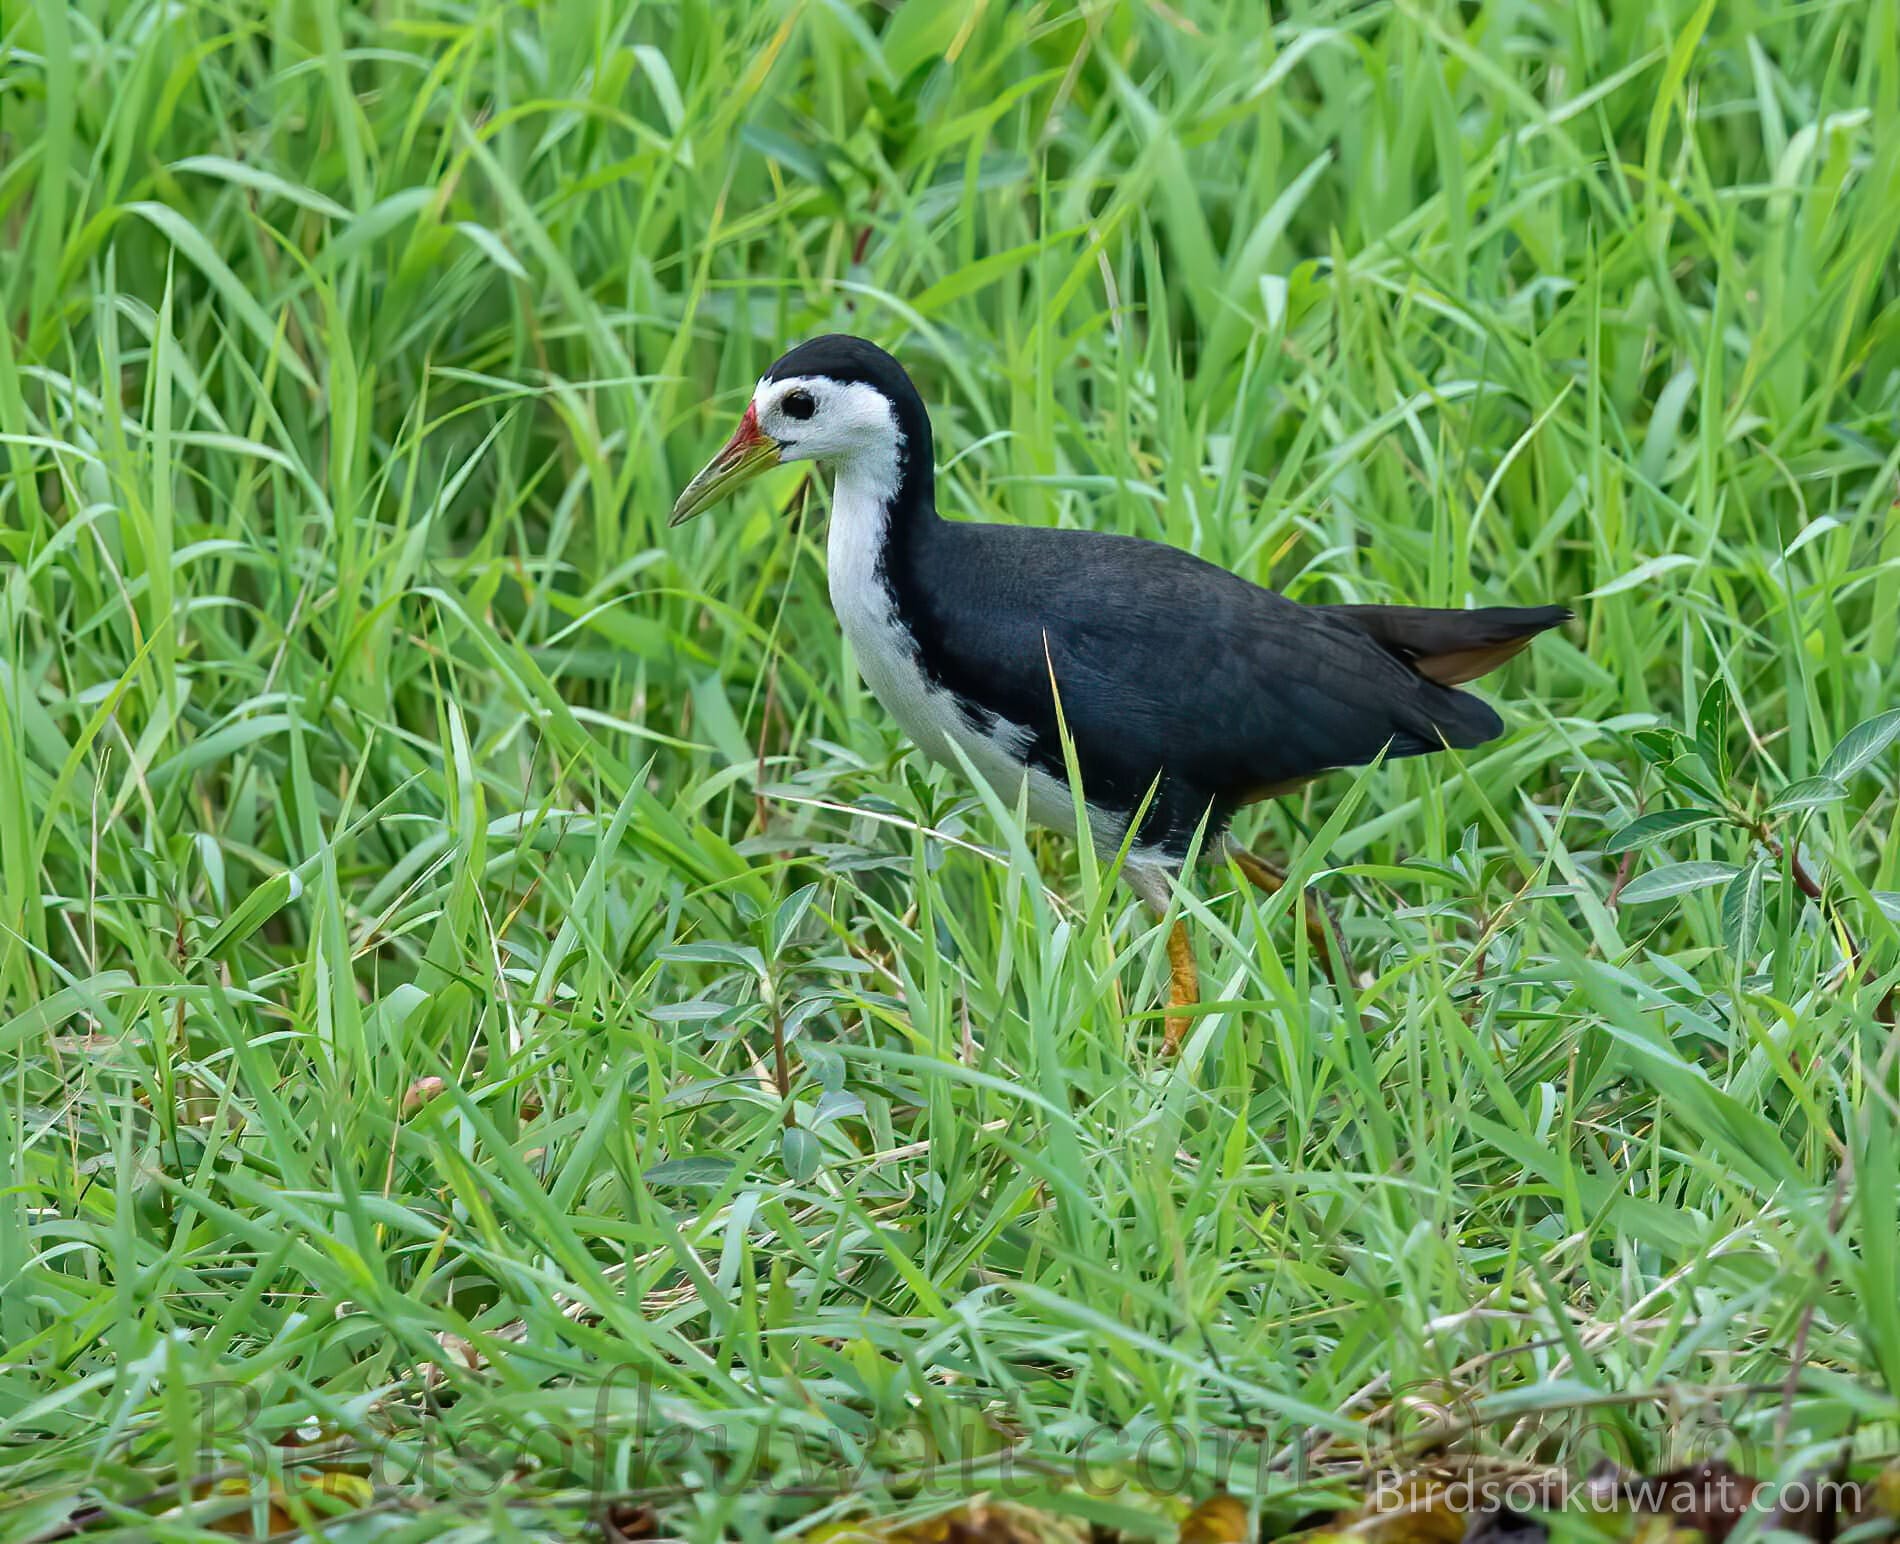 White-breasted Waterhen on grass